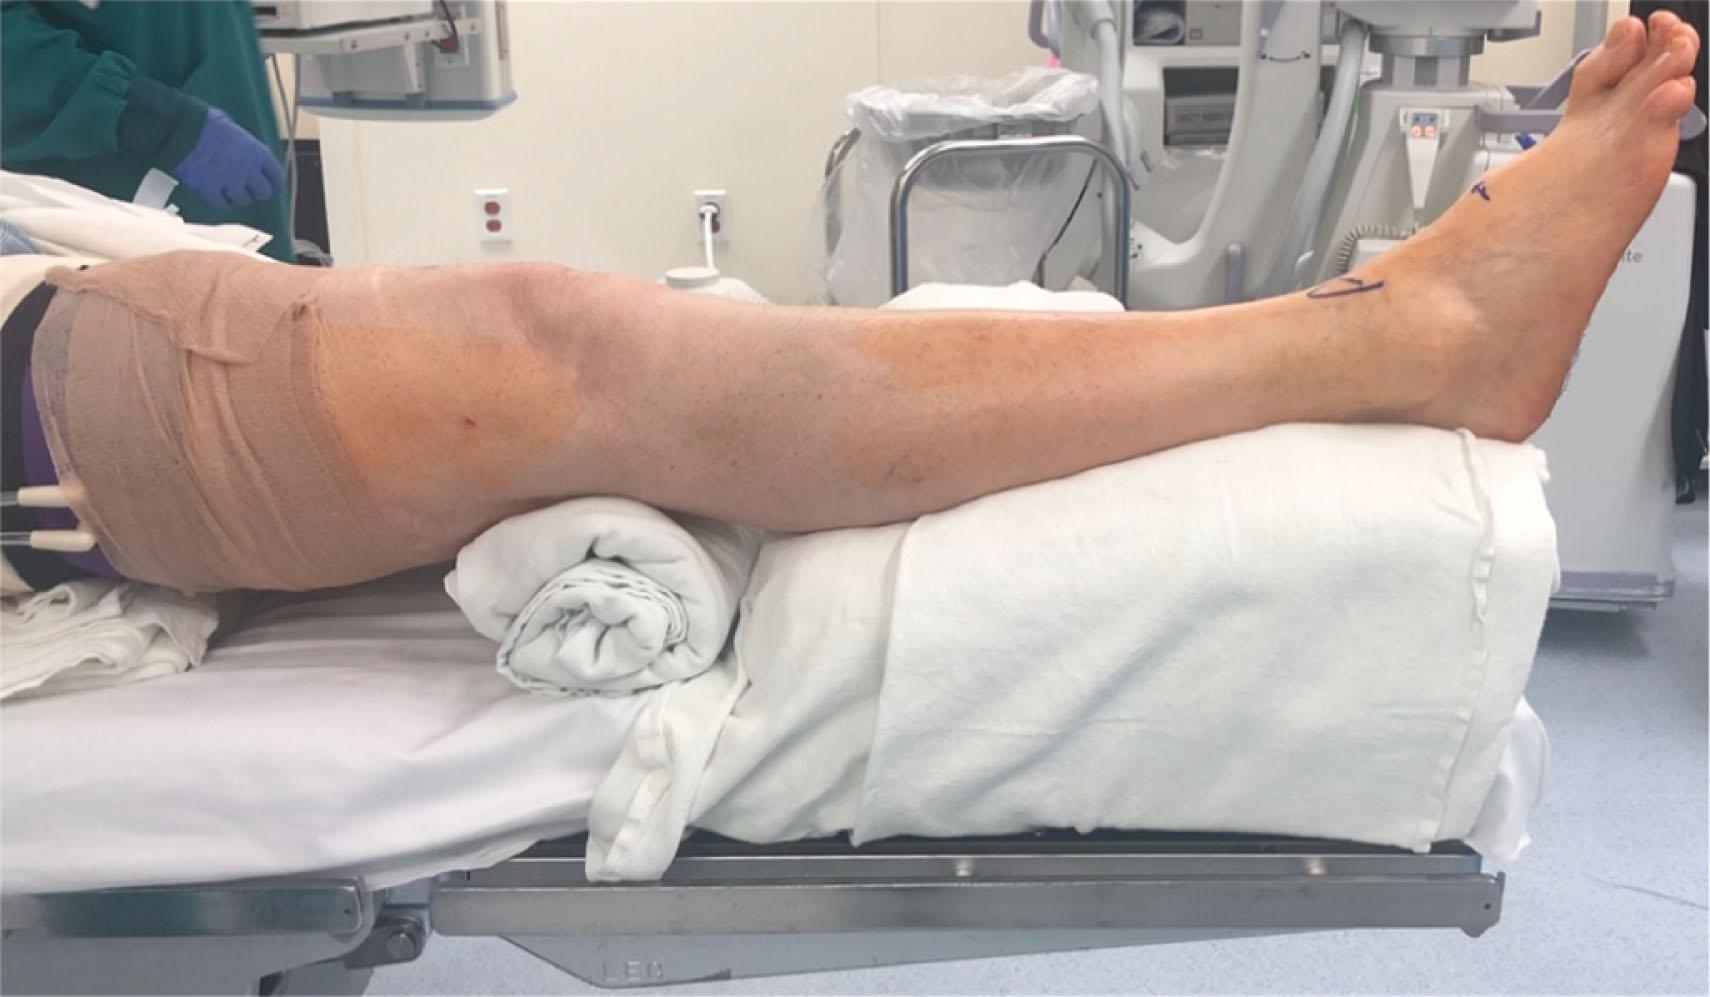 Fig. 23-8, Patient positioning for total ankle replacement. The leg is elevated on a short, padded platform with a thigh tourniquet and bump under the hip to rotate the ankle mortise into an upright position. The heel is at the end of the bed. Fluoroscopy is brought in from the opposite side.